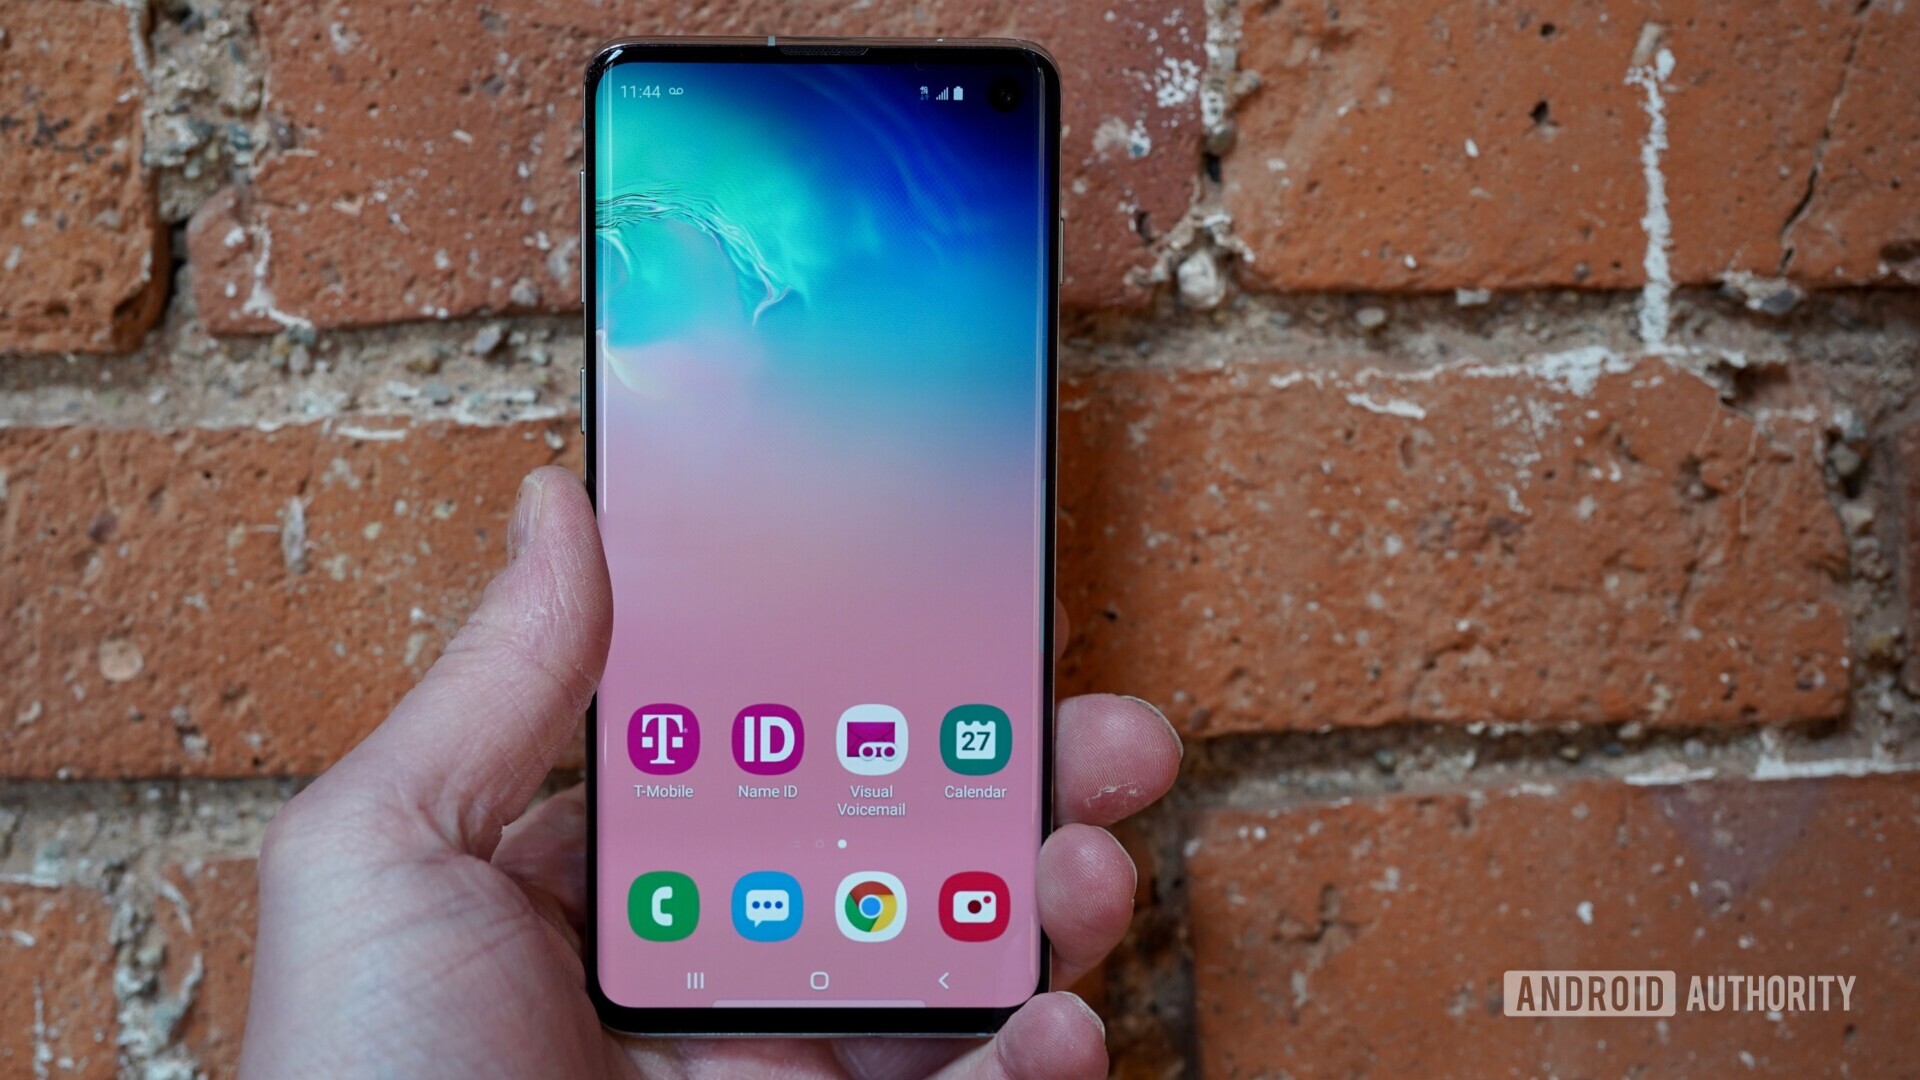 Front side of the Samsung Galaxy S10 held in hand with the display turned on.